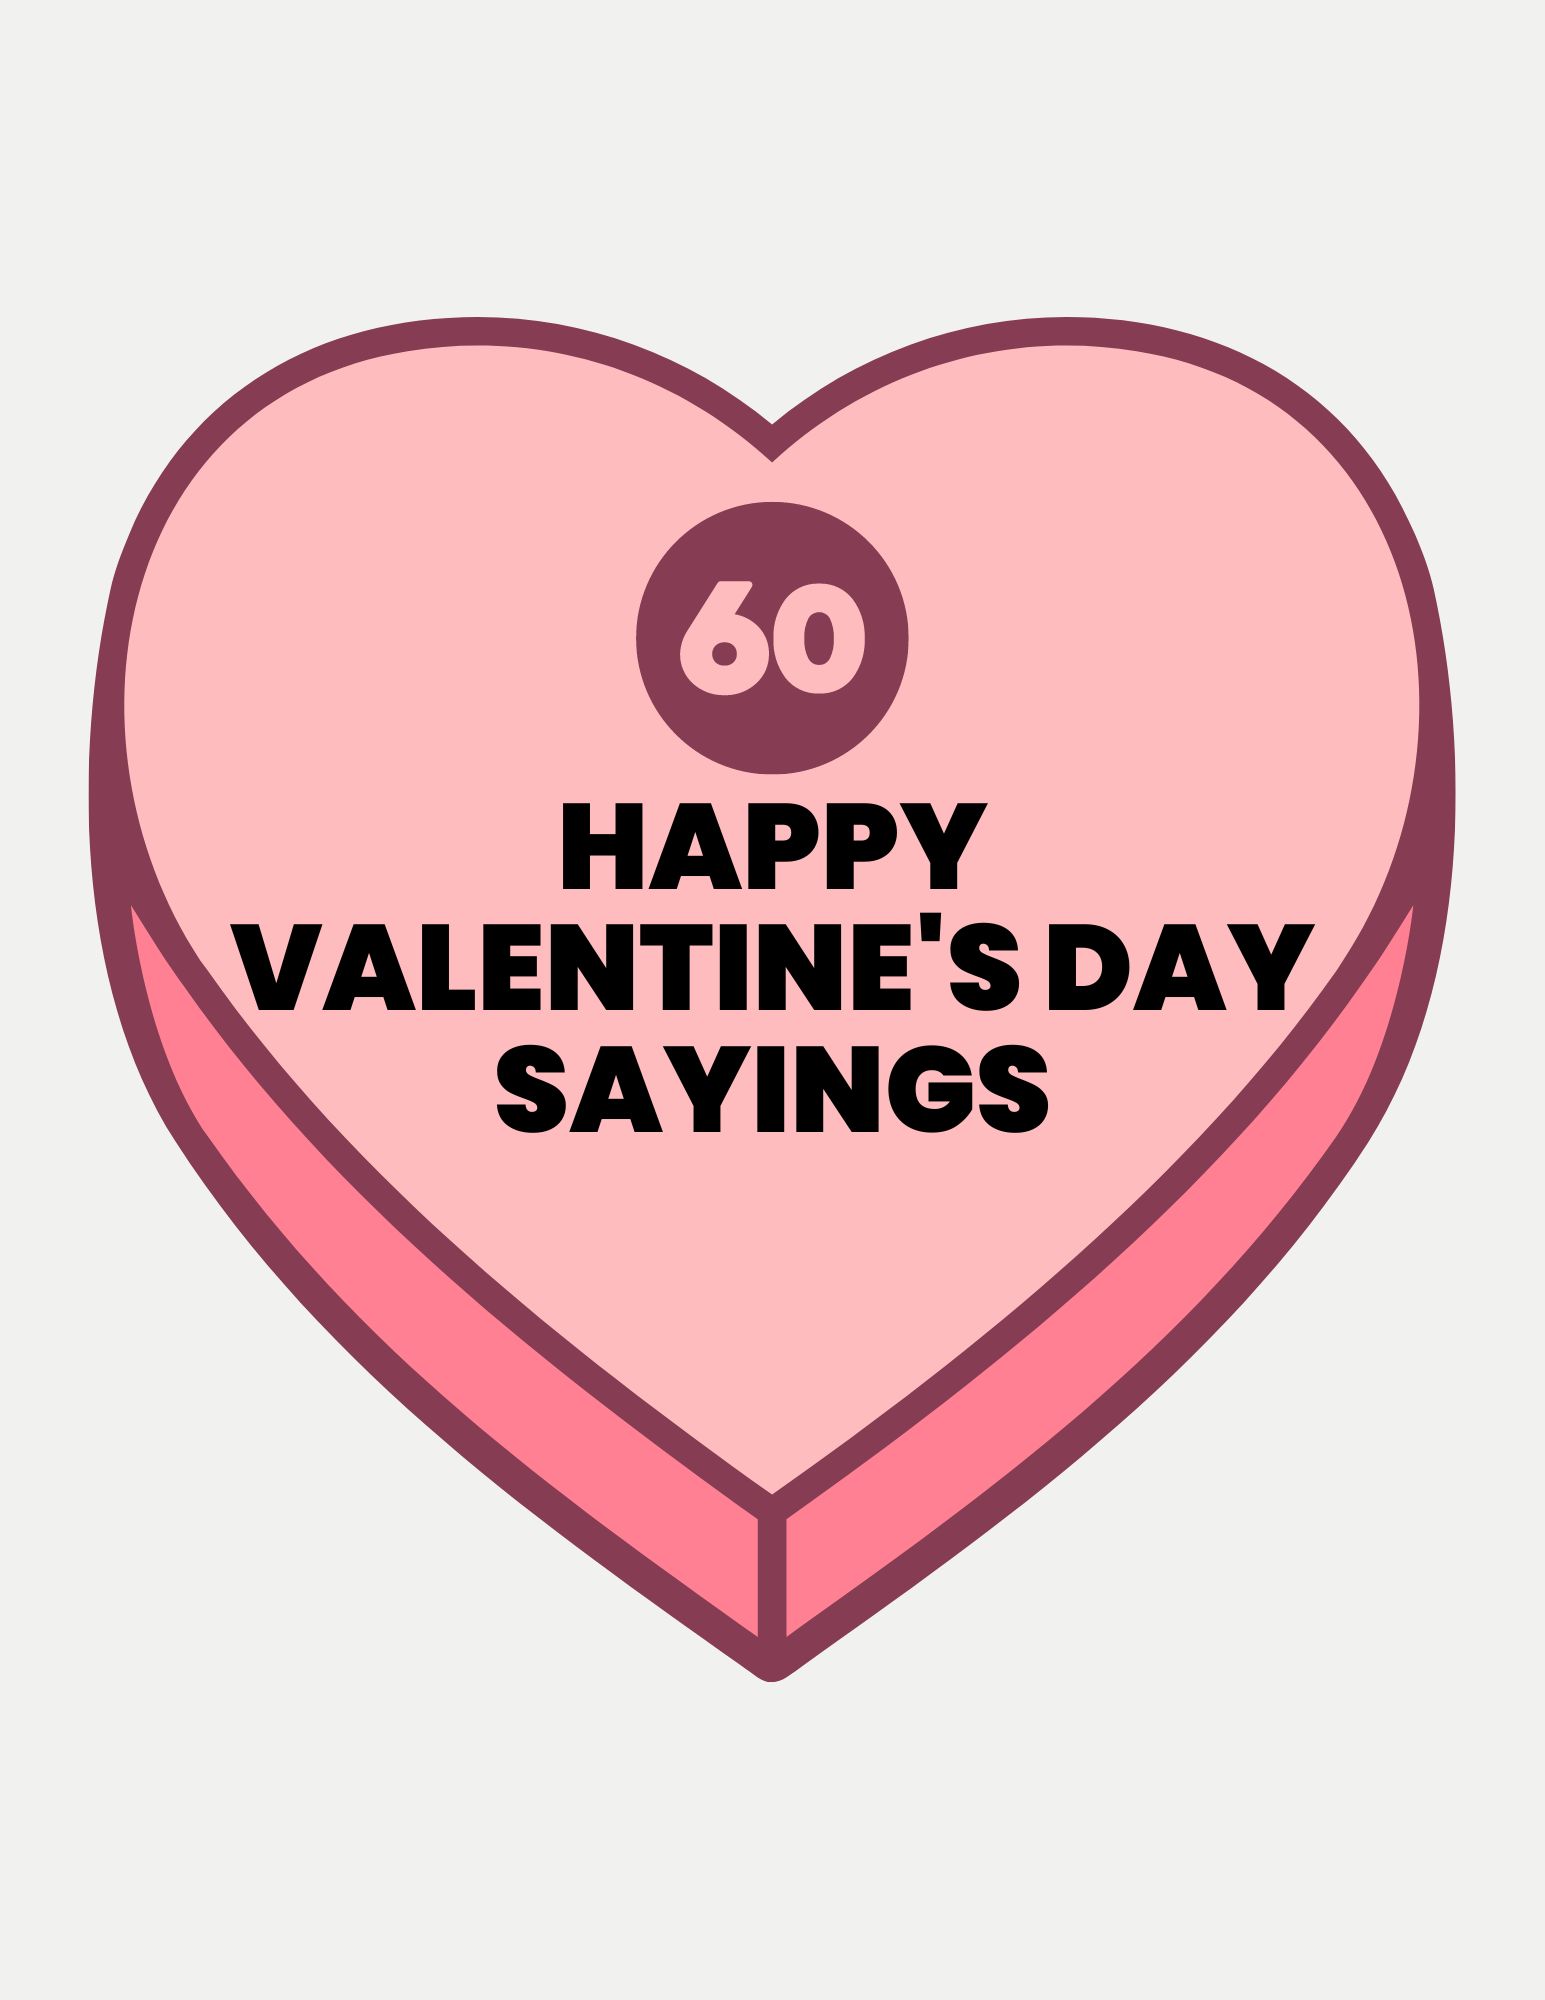 60+ Cute Sayings for Valentine's Day - Making A Space